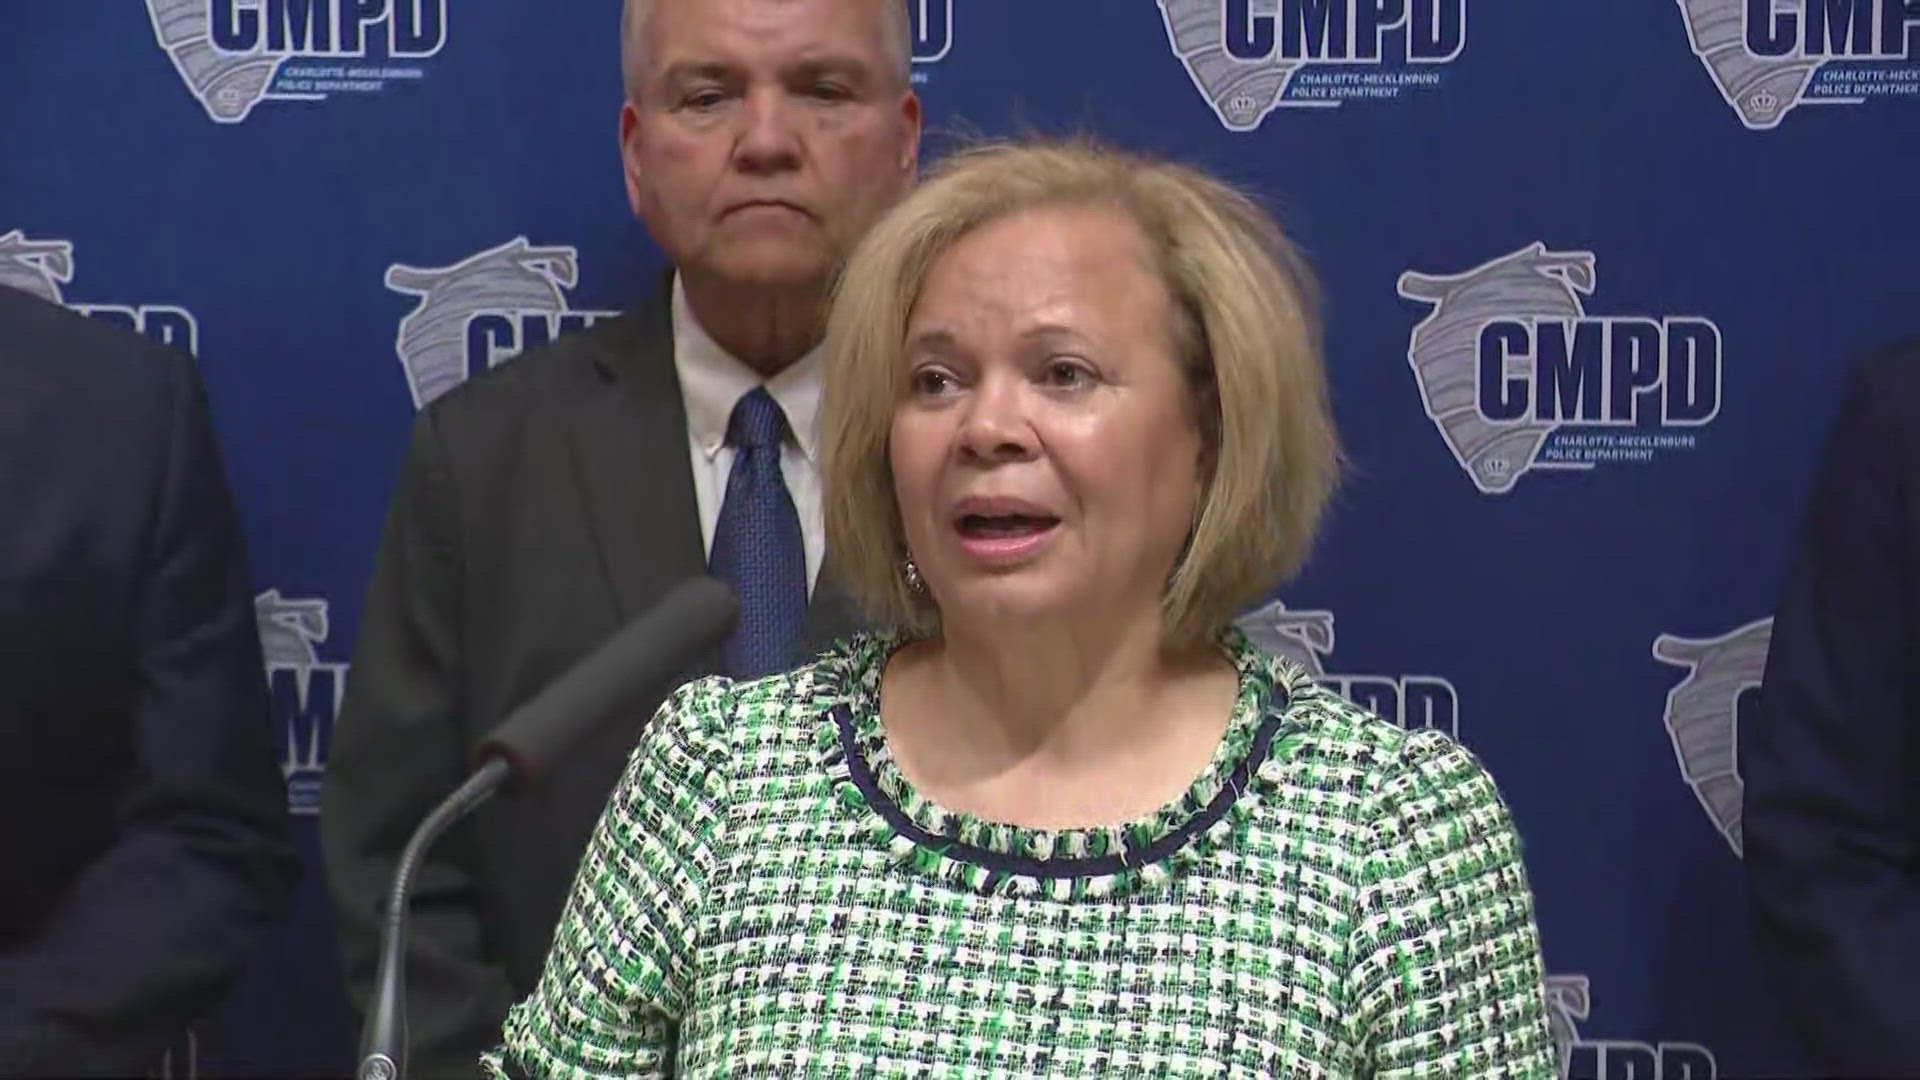 Charlotte Mayor Vi Lyles speeches about a deadly shooting that killed four law enforcement officers and injured four other officers on Monday.